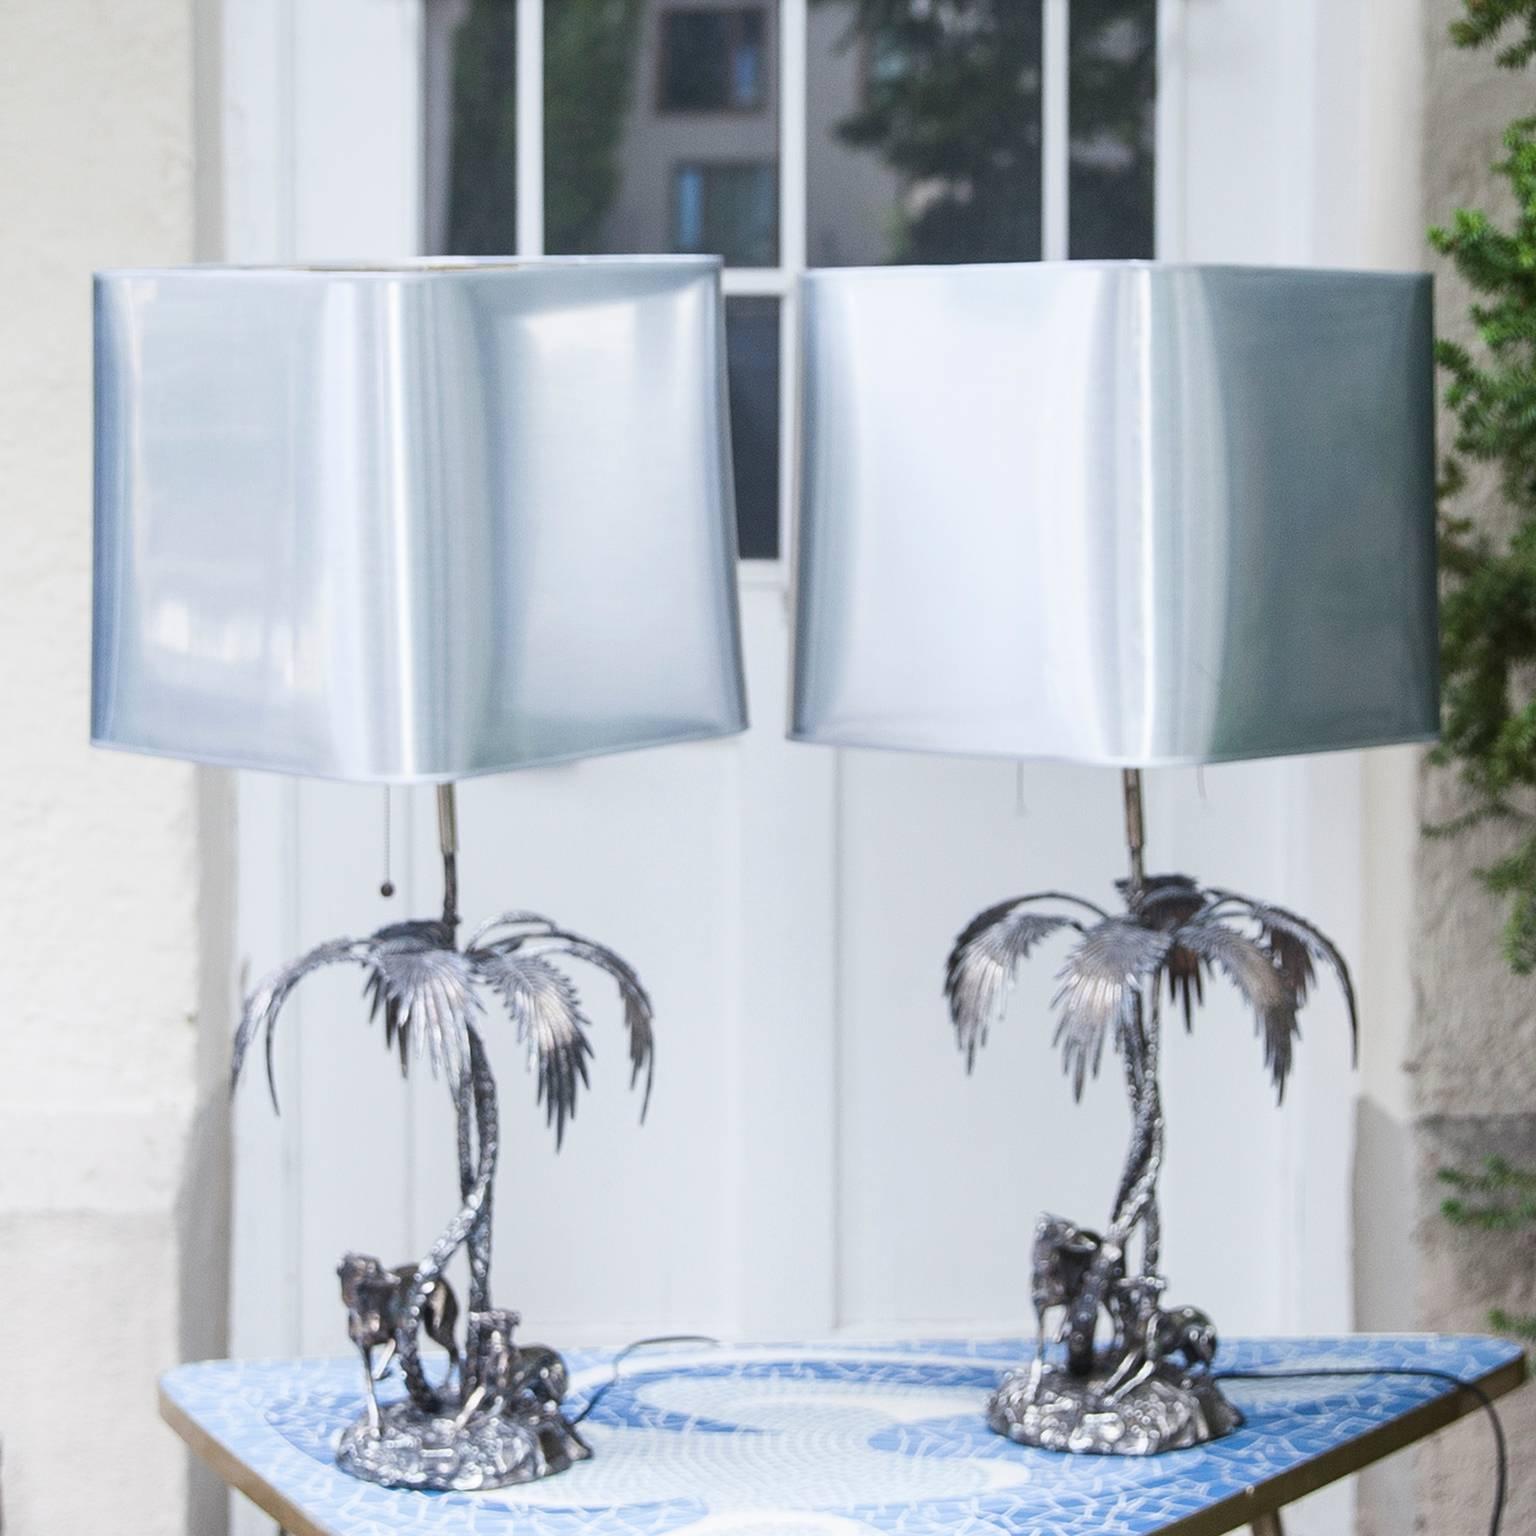 Vintage Valenti table lamps, crafted of fine quality solid silvered bronze, made in Spain 1970s. These Spanish silver plate bronze figural table lamps sculpture depicting greyhounds and palm trees. Marked on base Valenti, Made in Spain.
The shades